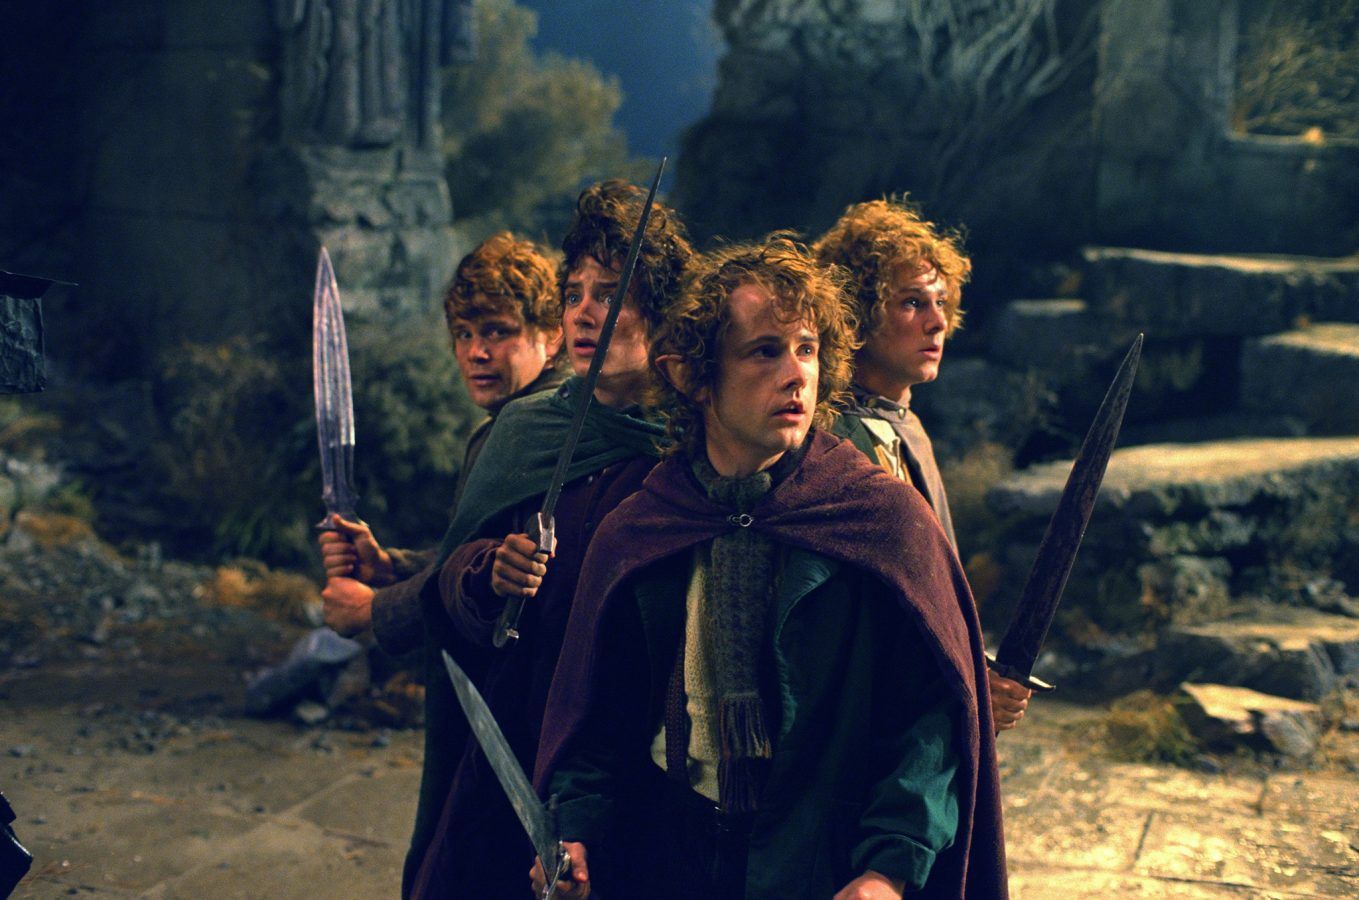 The Lord of the Rings: The Fellowship of the Ring Wins Visual